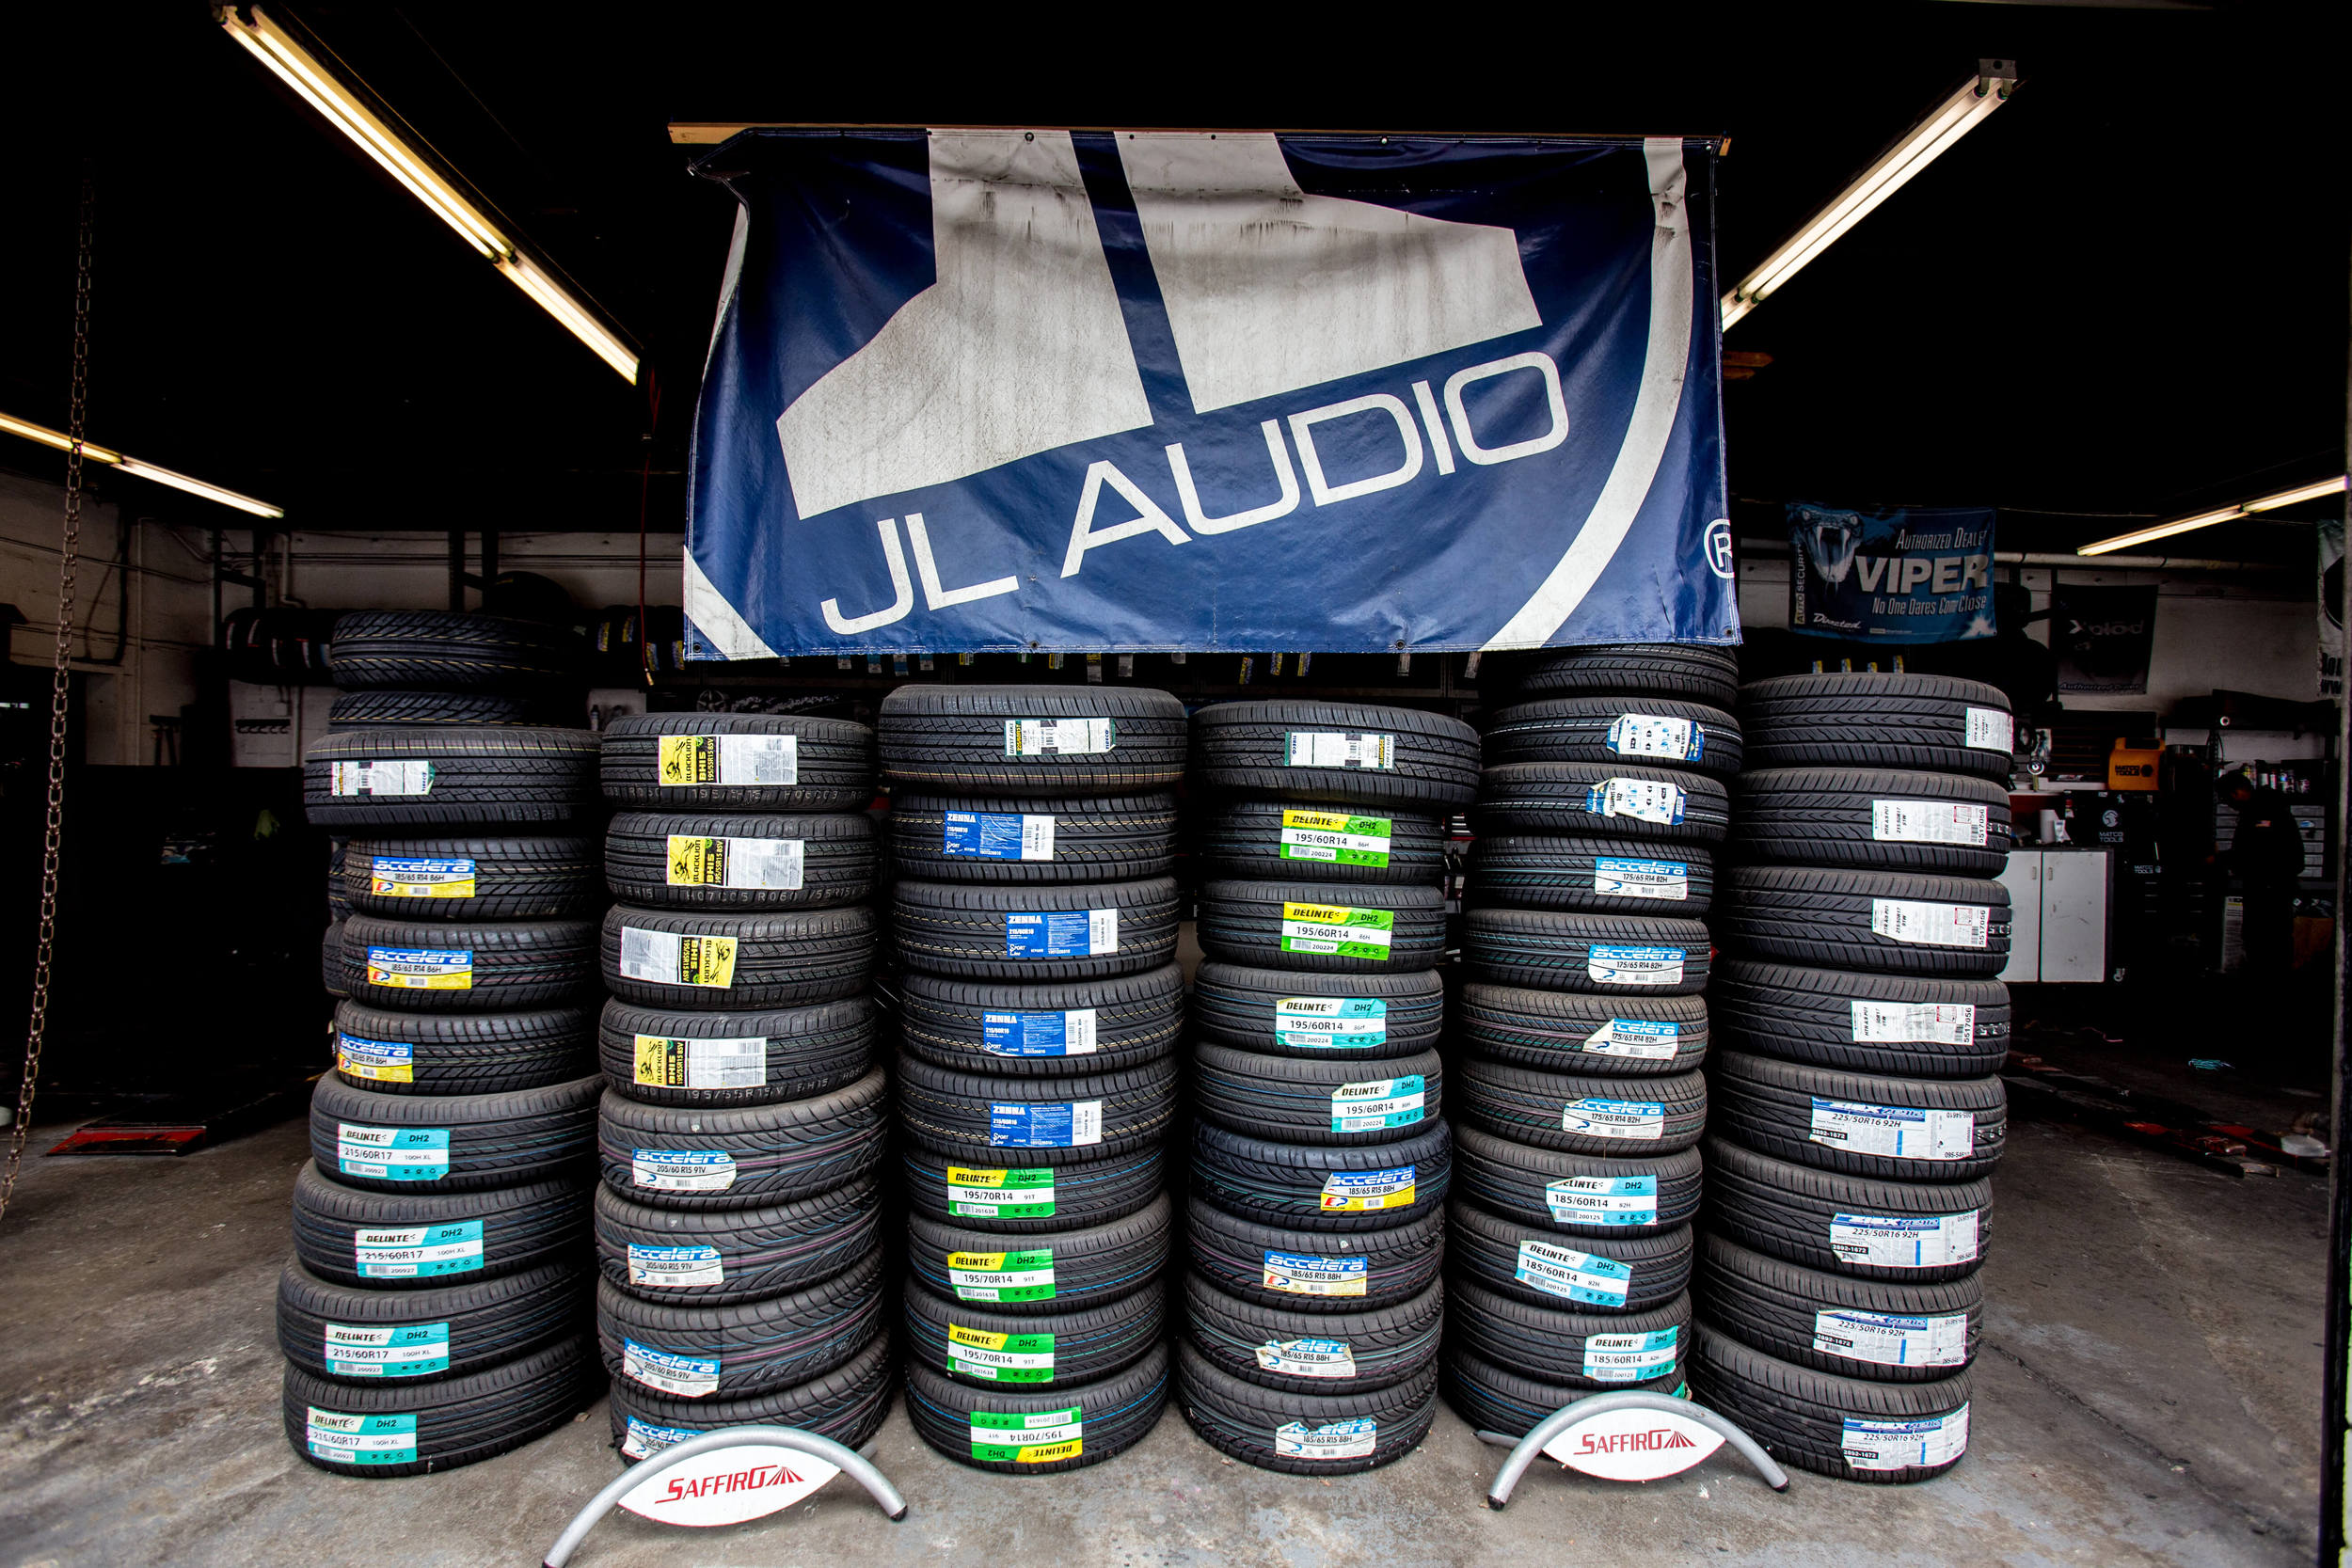 Audiosport has all of the best cheap car tires!